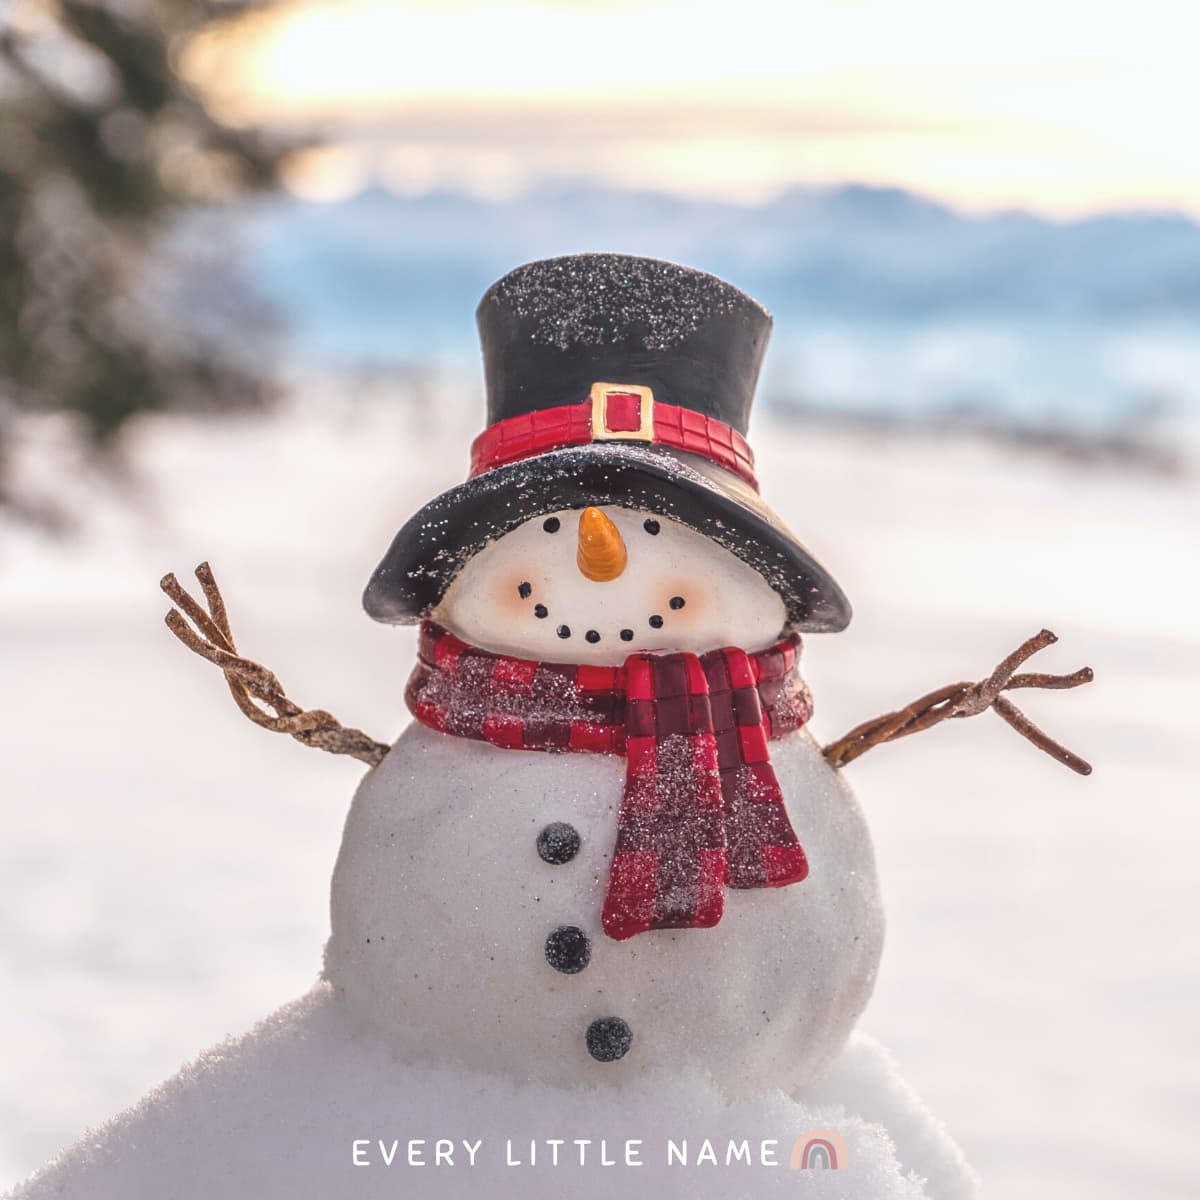 Snowman with hat and scarf.